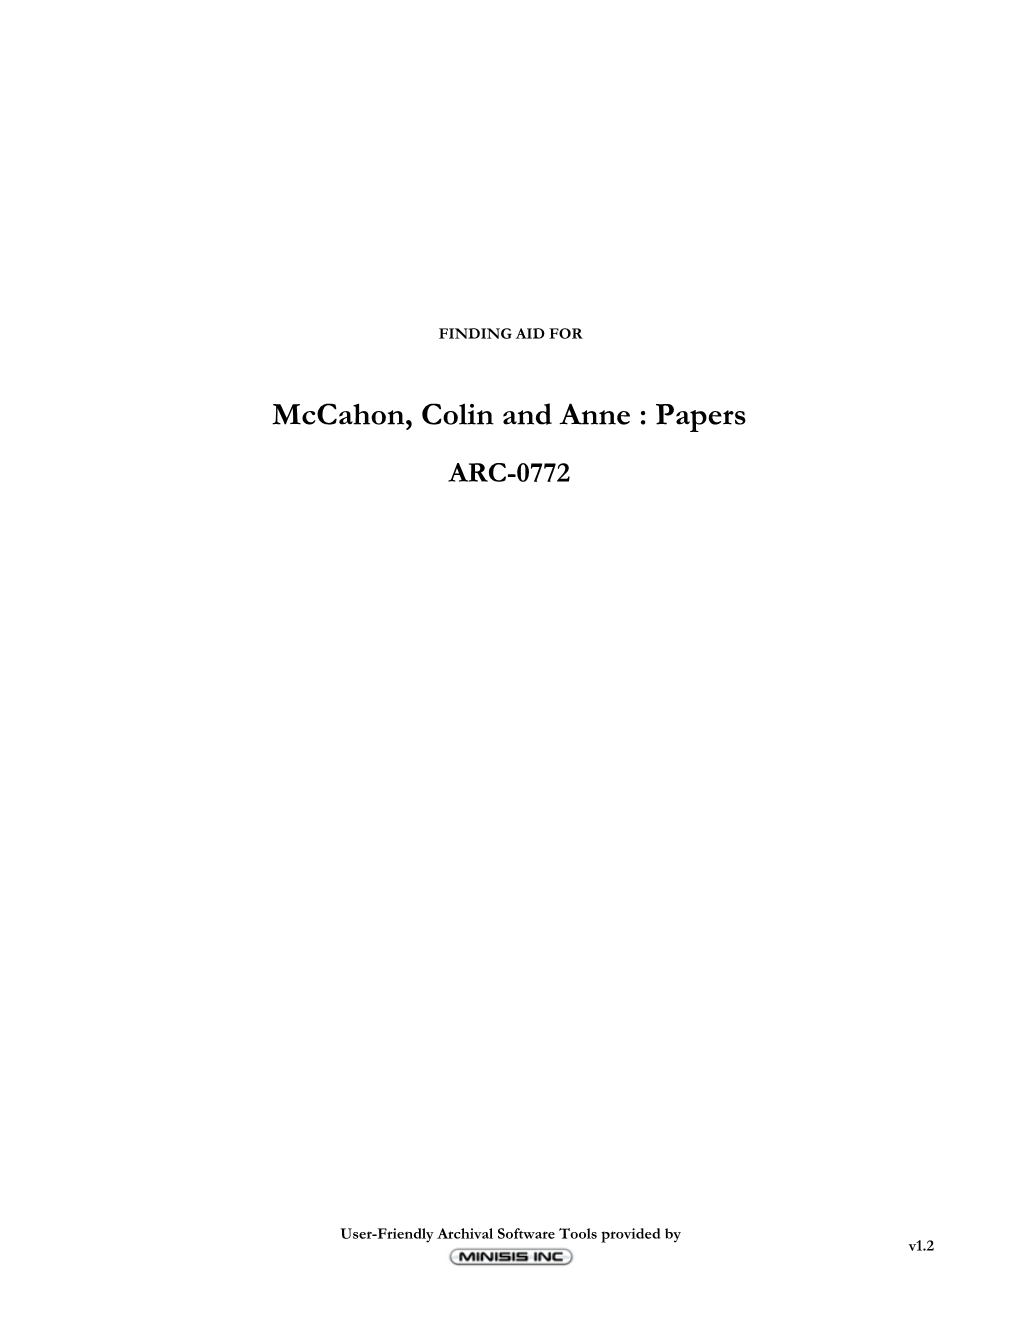 Mccahon, Colin and Anne : Papers ARC-0772